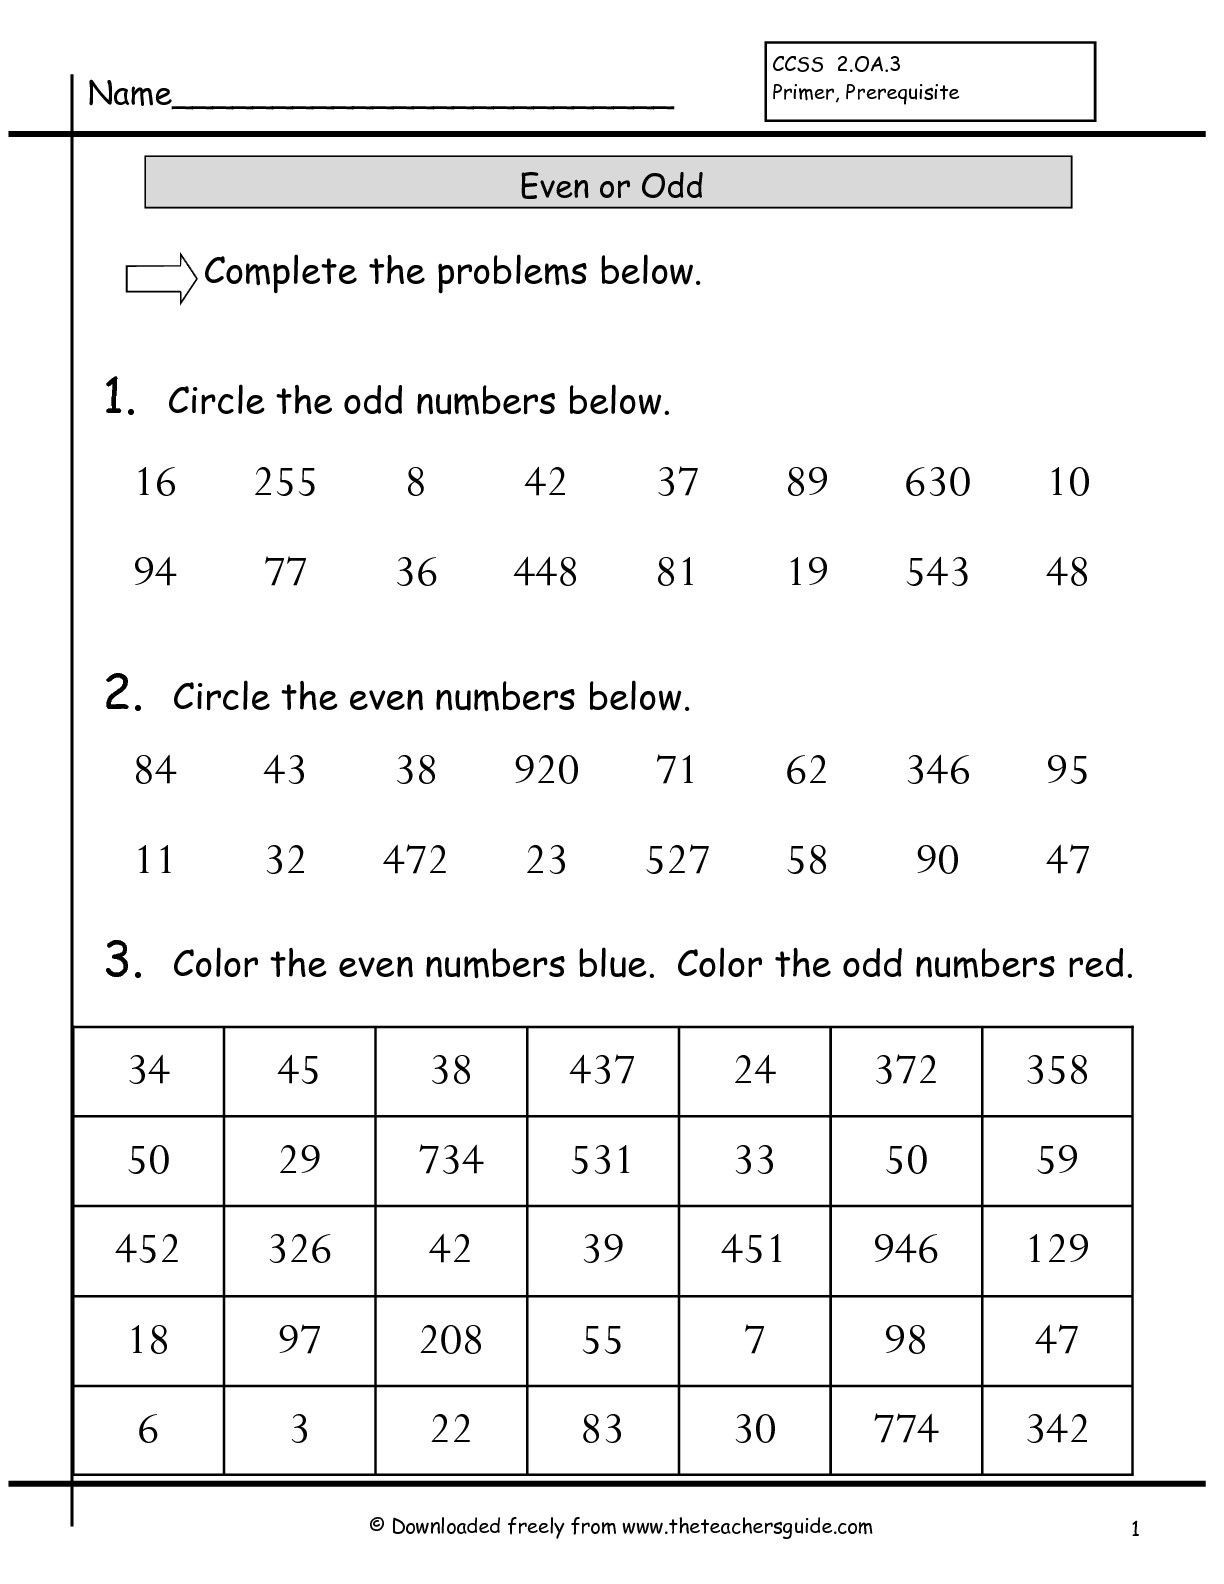 Free Math Worksheets Second Grade 2 Skip Counting Skip Counting by 2 Odd